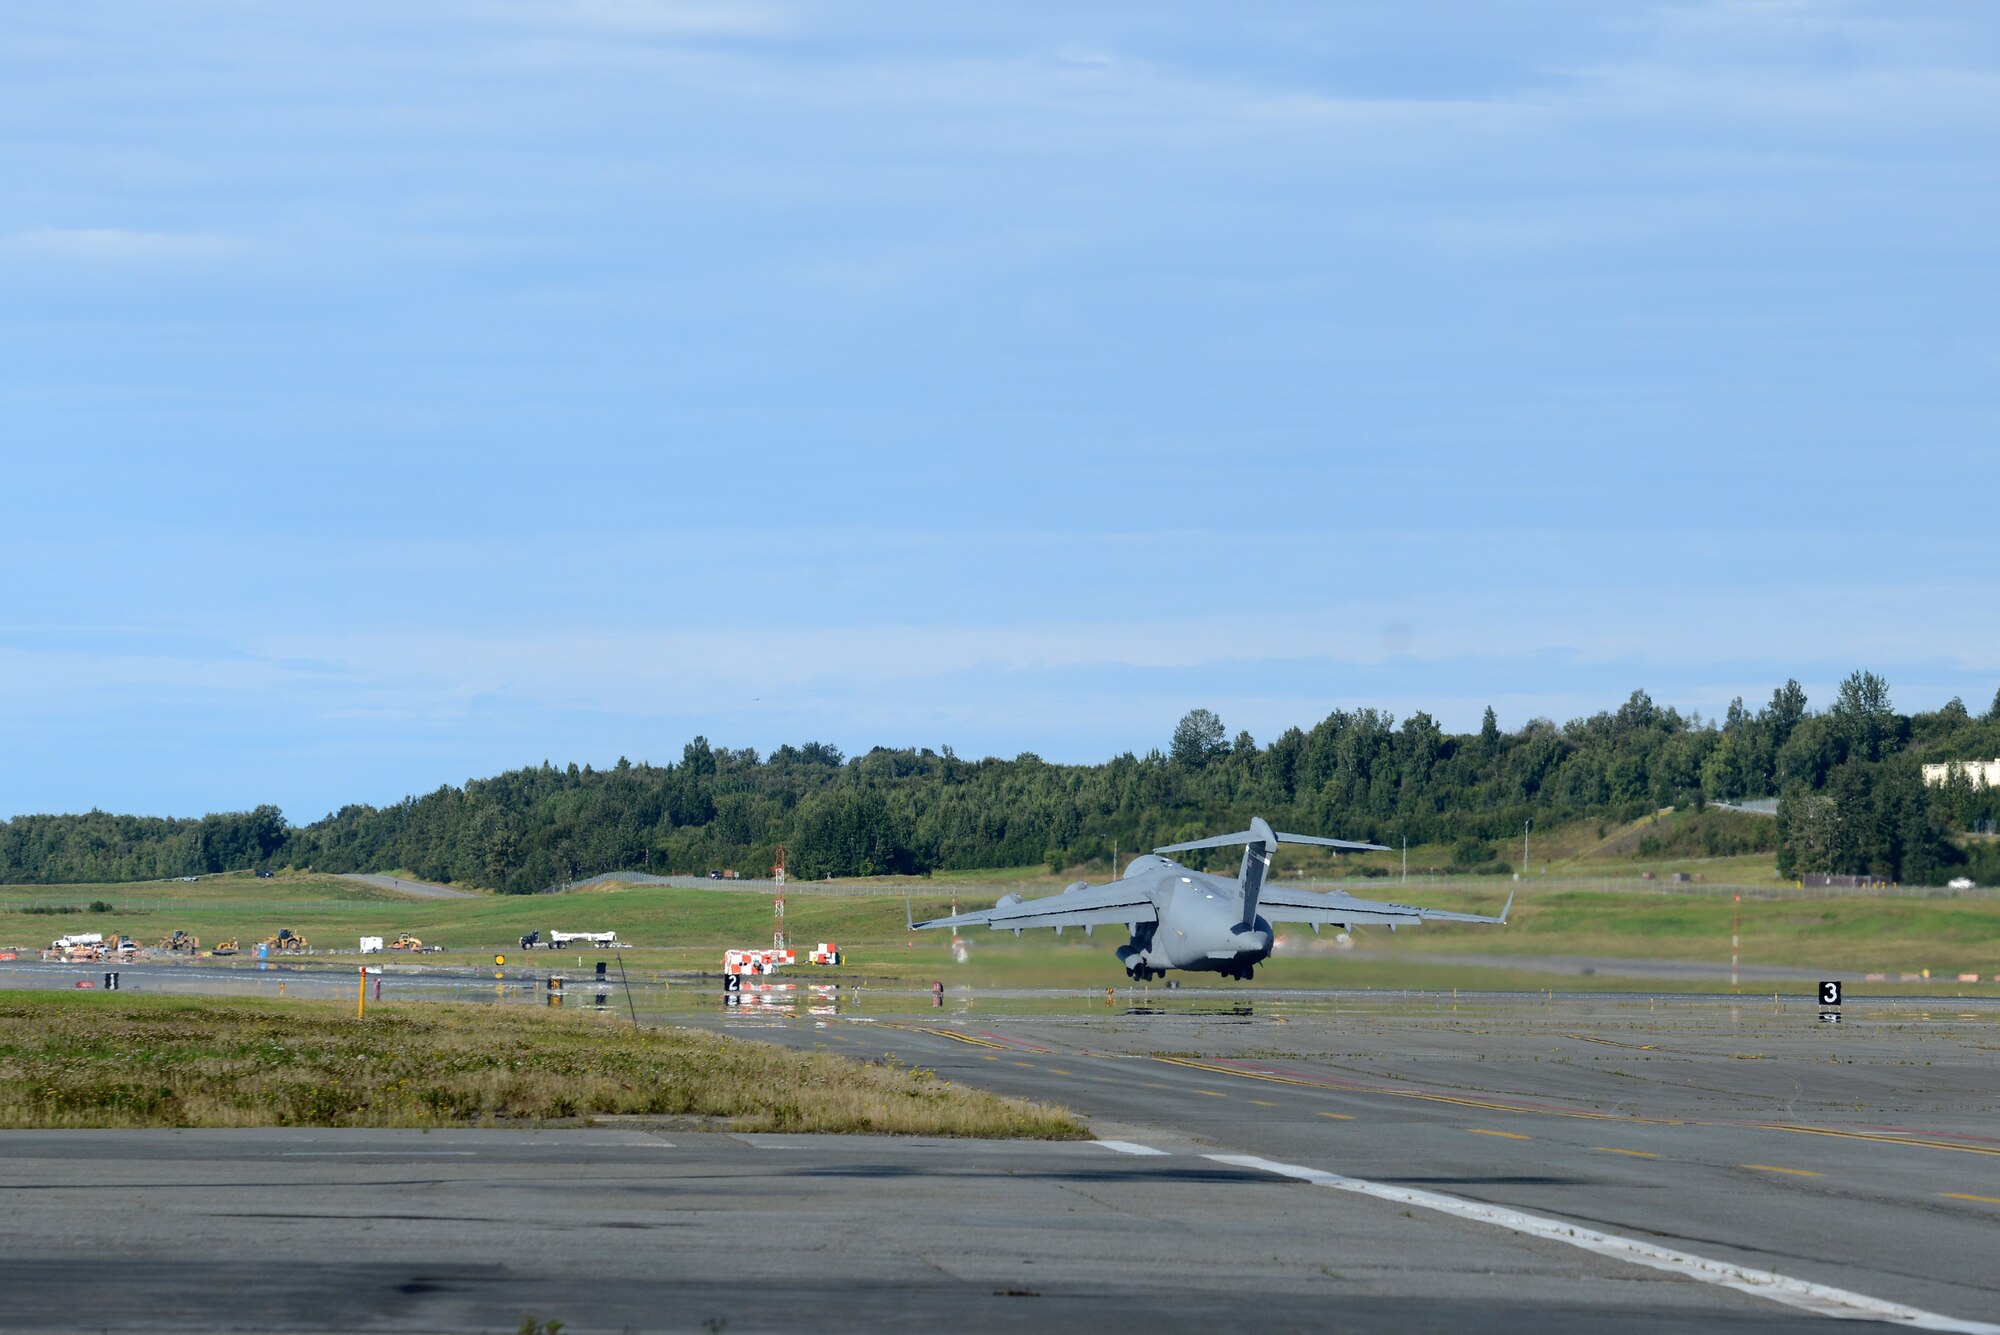 A C-17 Globemaster III, at Joint Base Elmendorf-Richardson, Alaska, Aug. 28, 2017, leaves for Moffett Airfield, California, to retrieve two helicopters en route to Texas to provide humanitarian support after Hurricane Harvey. The Air National Guard 176th Wing sent personnel from the 212th Rescue Squadron to provide search-and-rescue, and support aeromedical evacuation and humanitarian relief.